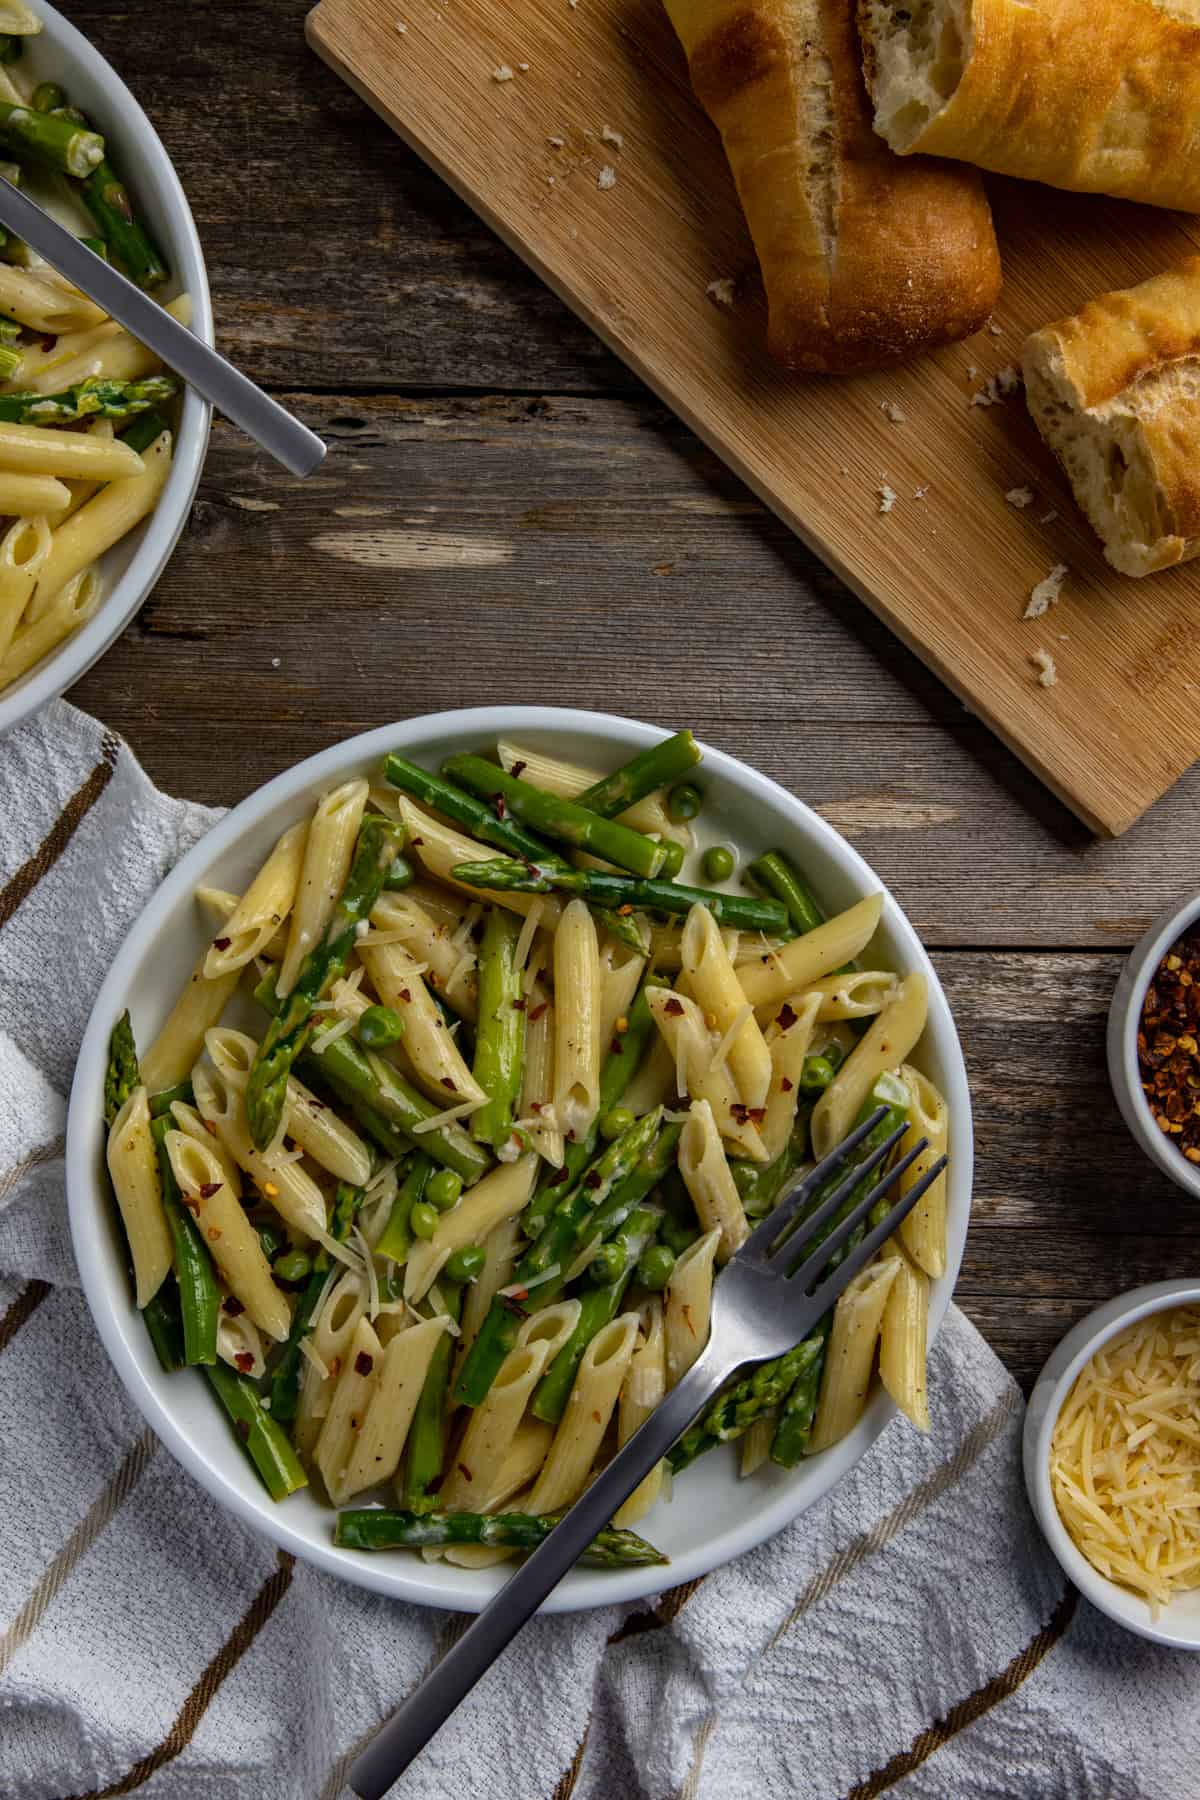 Cooked penne pasta with asparagus and sweet peas tossed in lemon garlic sauce and topped with parmesan cheese. In a white bowl with fork. French bread, extra cheese, and extra crushed red pepper in the background.